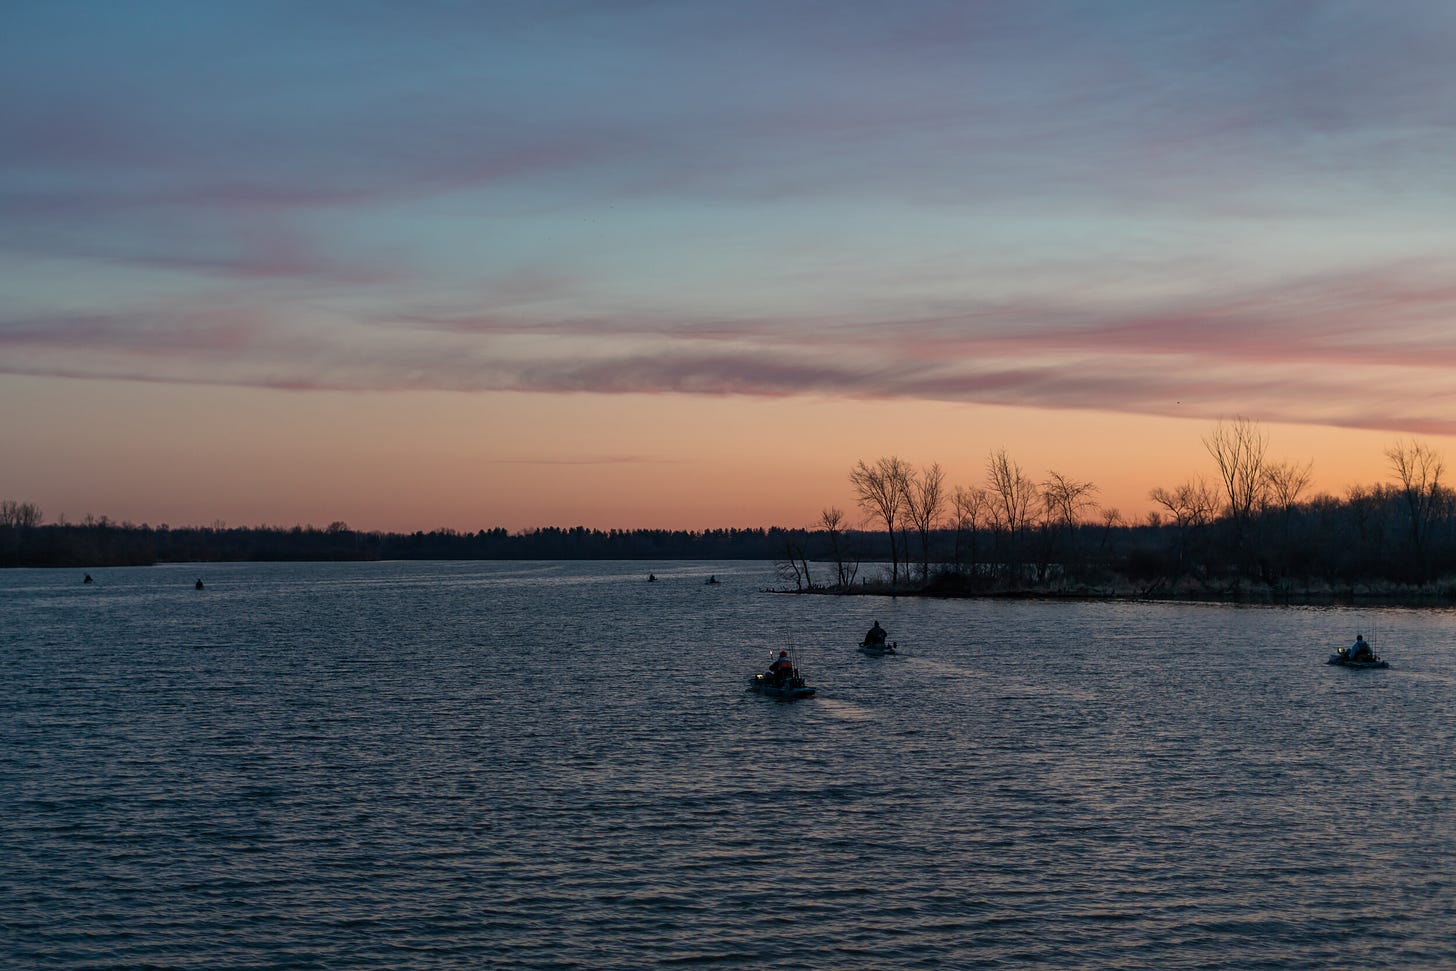  Lake Summit shows off her beauty in spectacular fashion, as 14 of the best kayak anglers in the state take off on day one. 